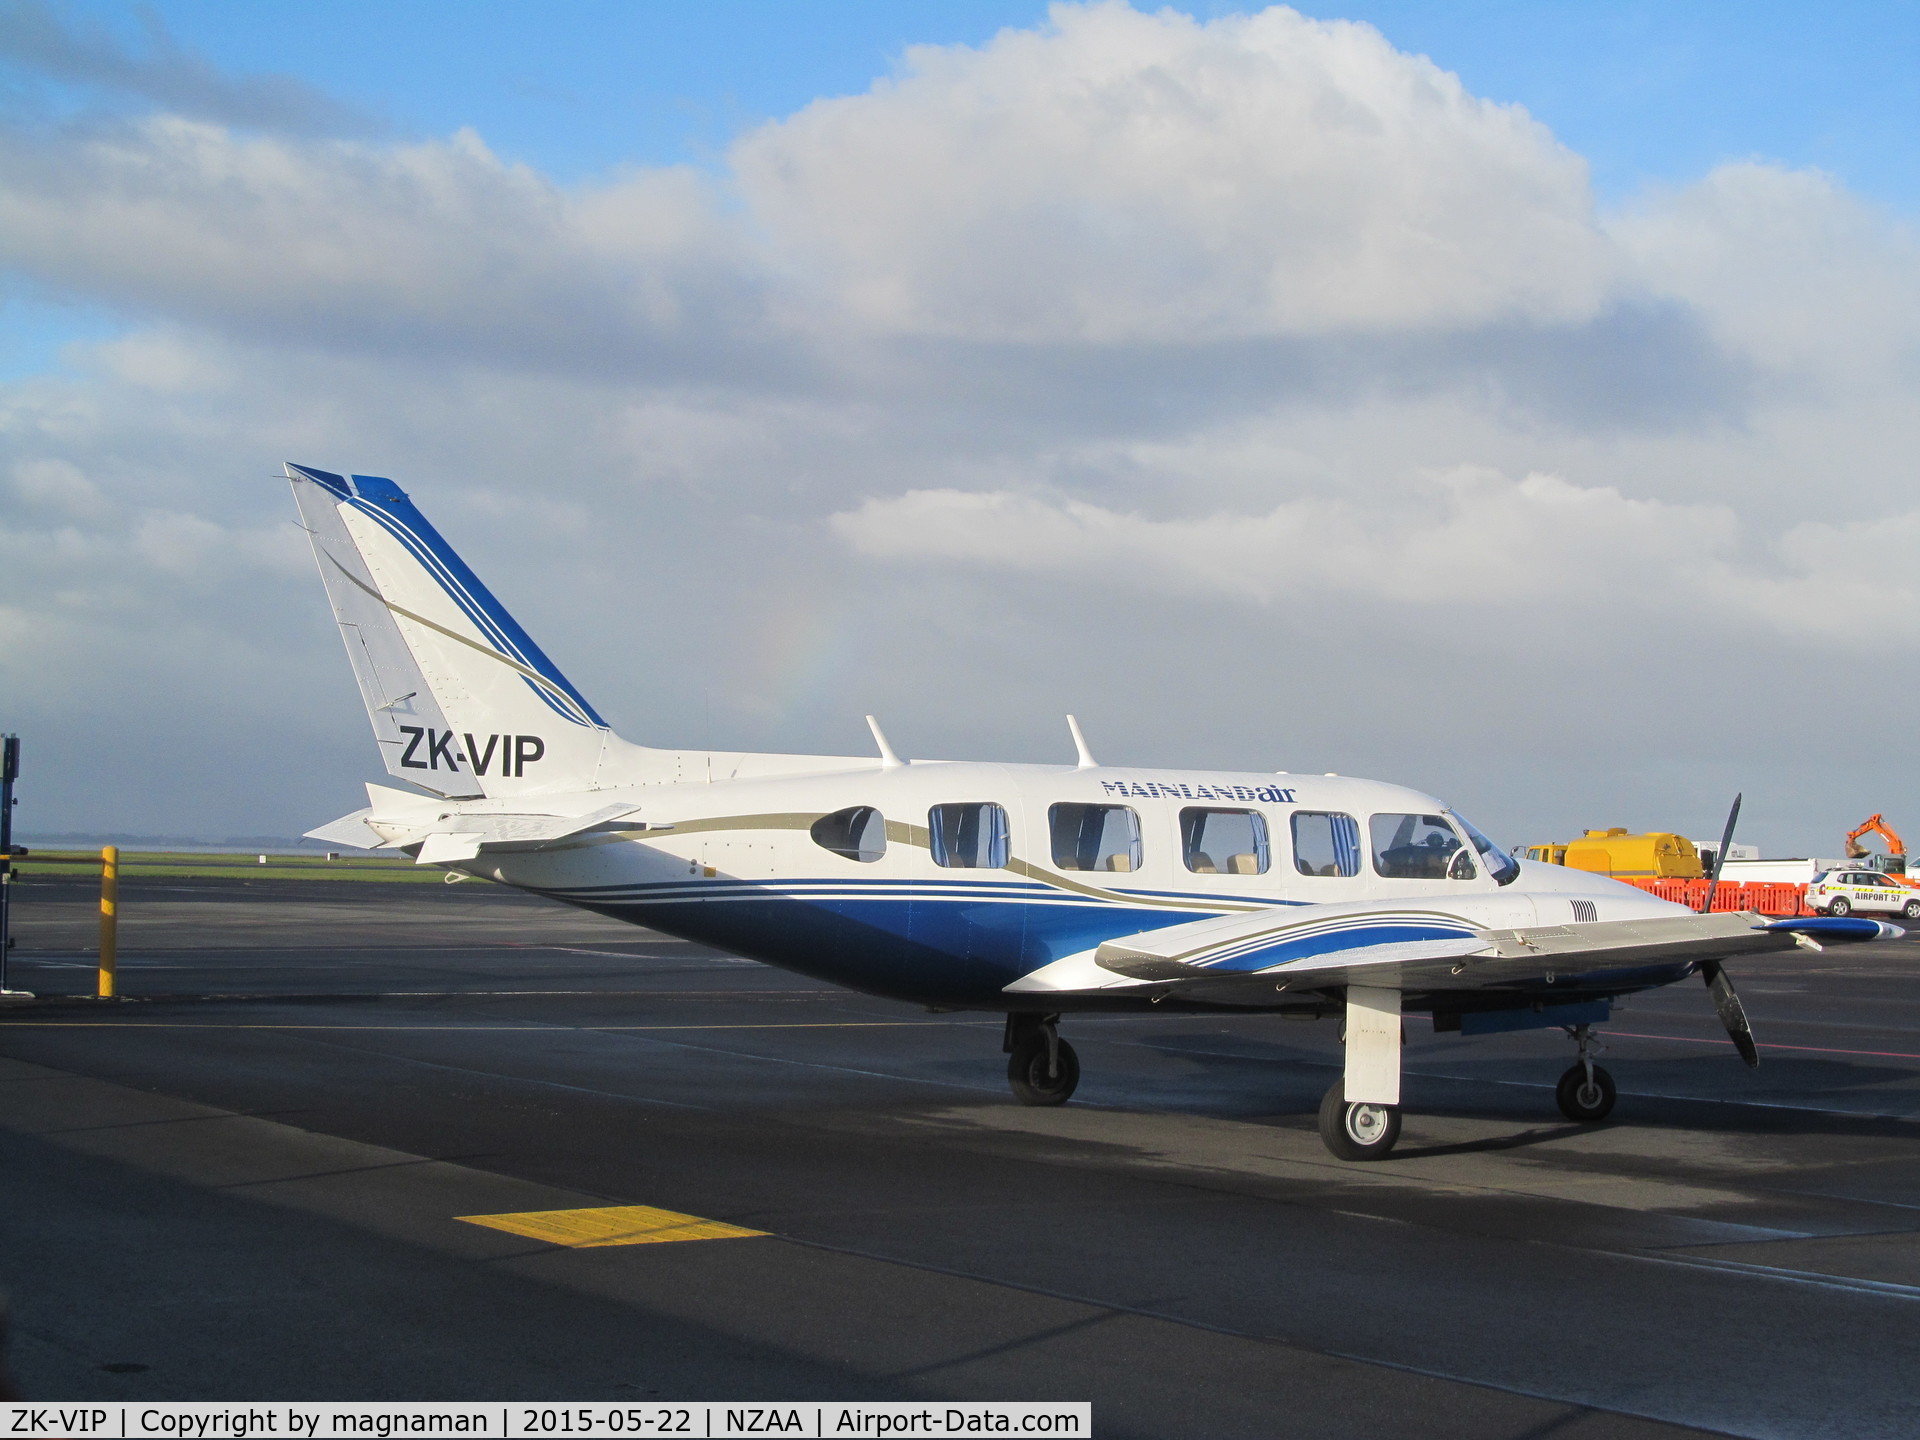 ZK-VIP, Piper PA-31-350 Chieftain C/N 31-7405482, At AKL - possibly on charter to Great Barrier Airlines